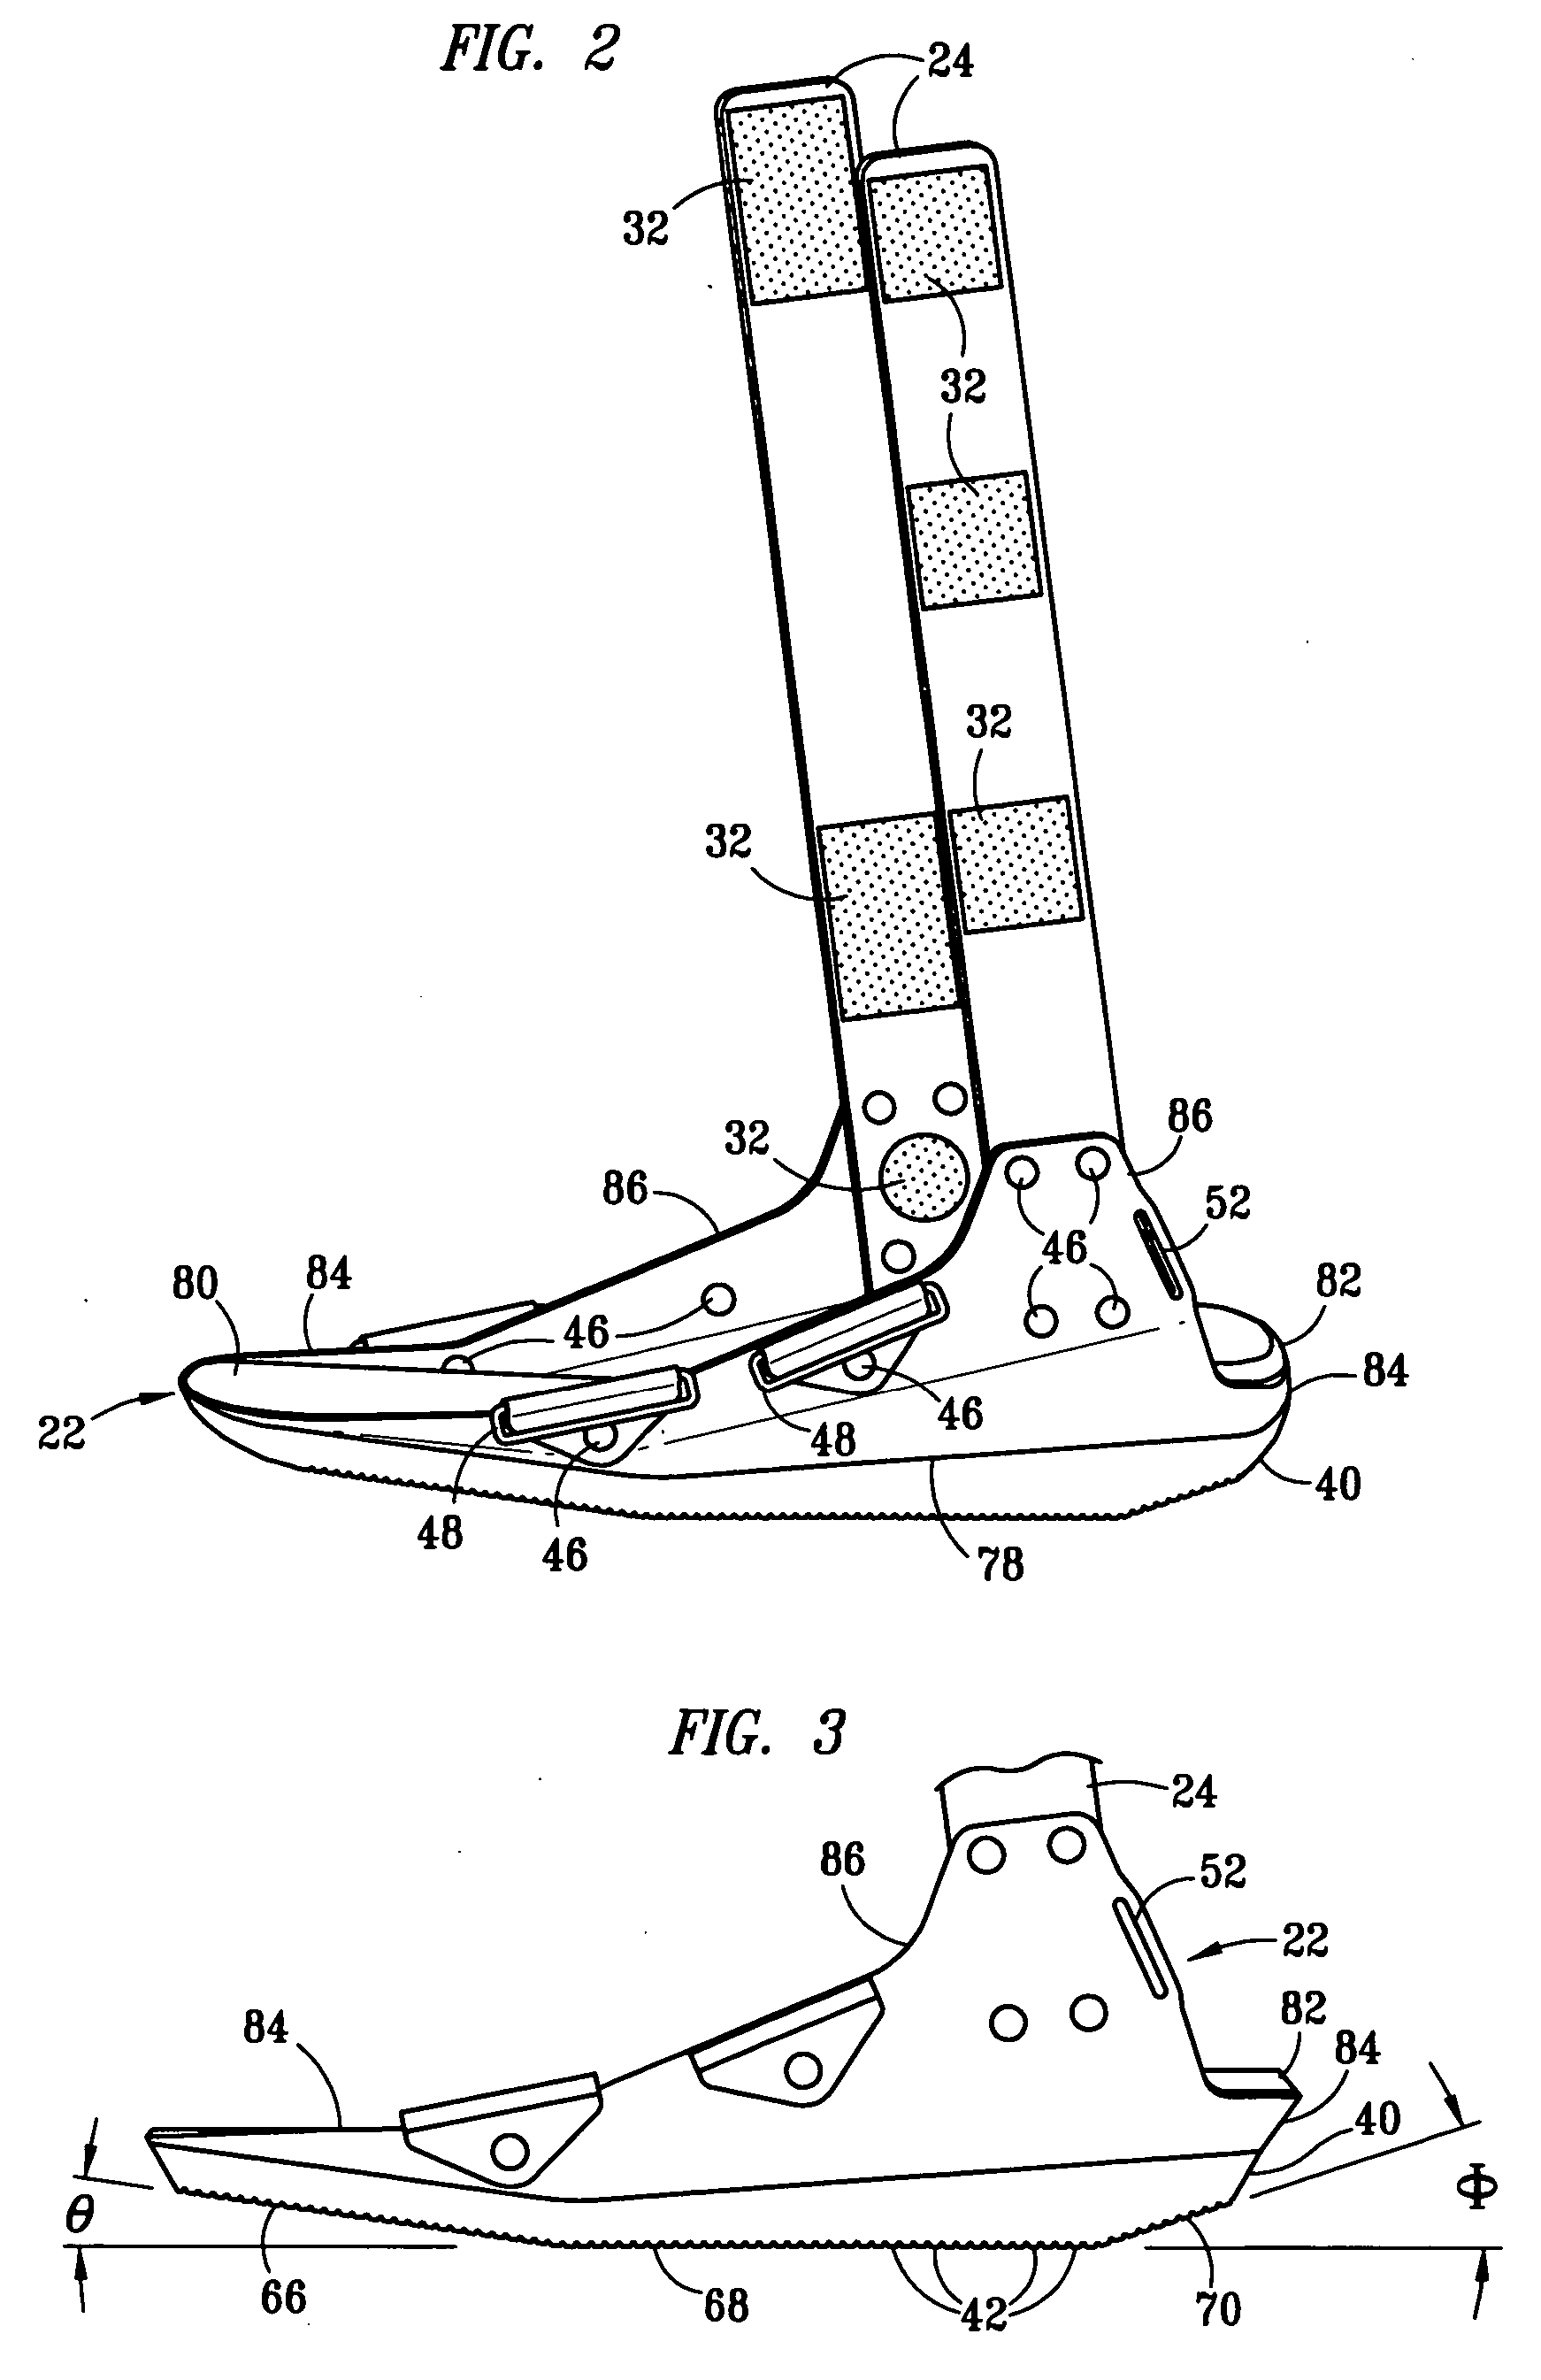 Boot for treatment of plantar fasciitis